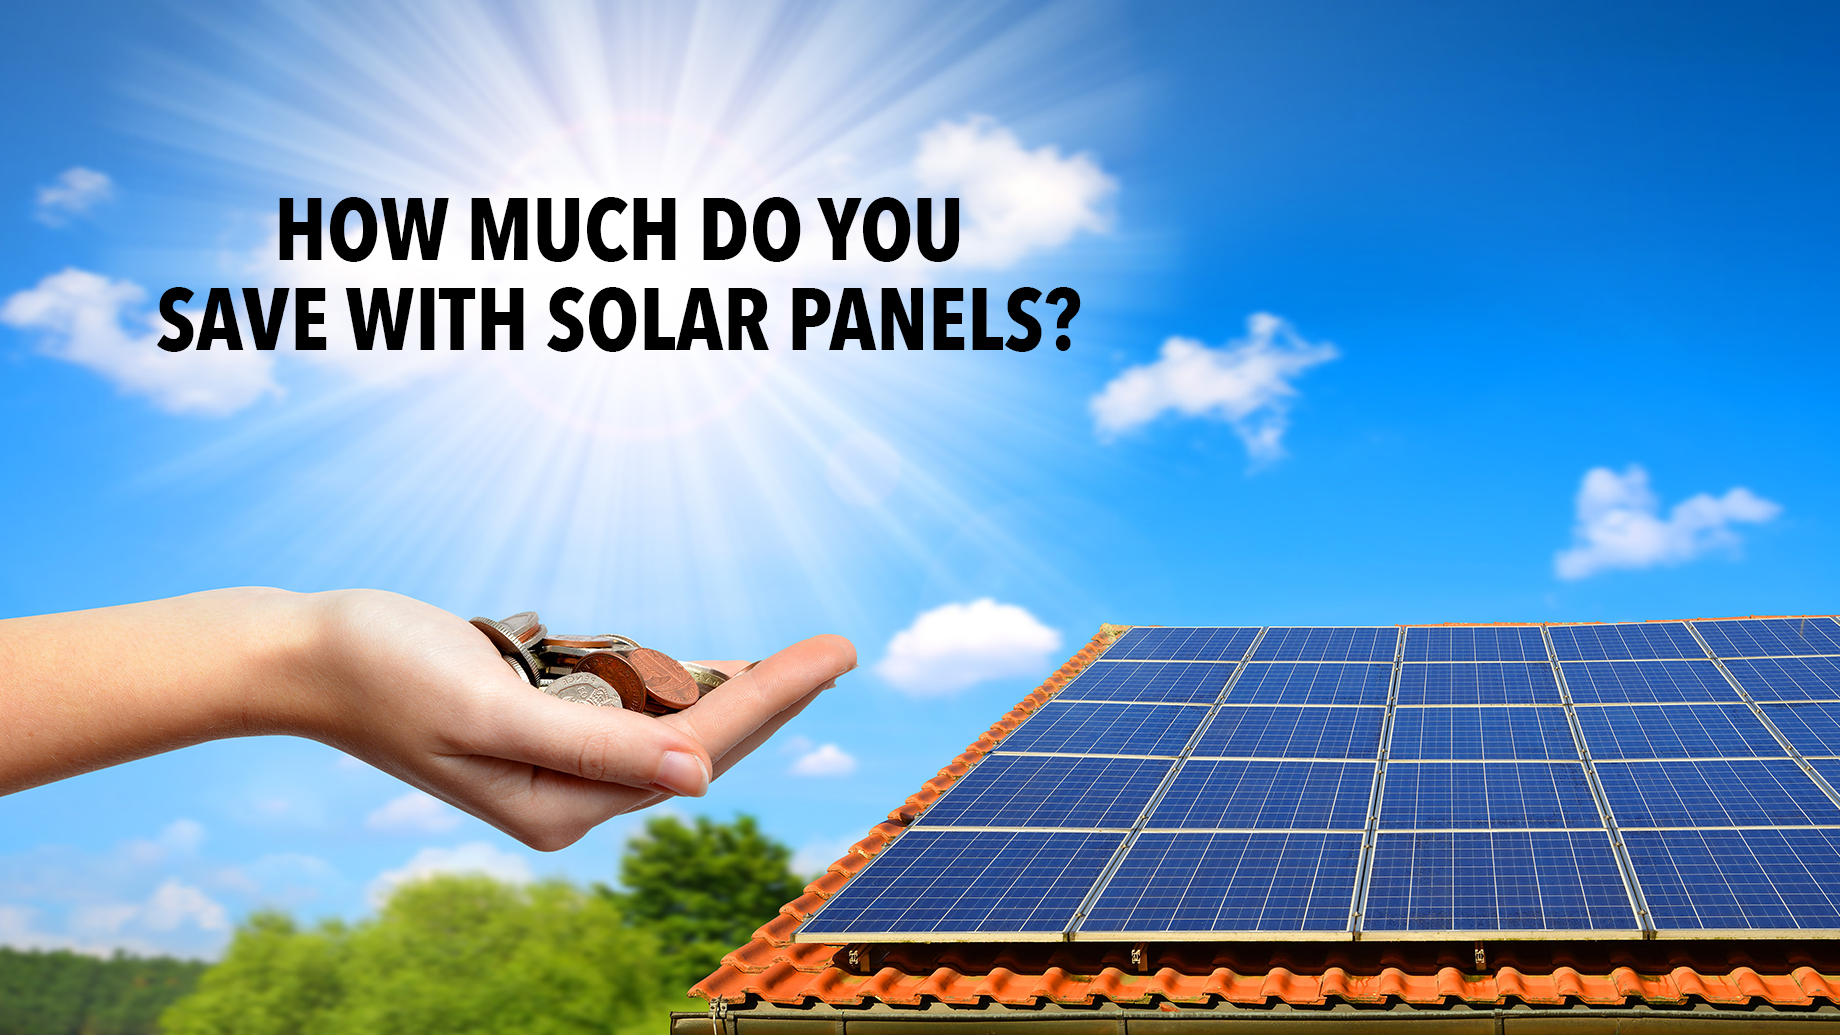 How Much Do You Save With Solar Panels? A Simple Guide